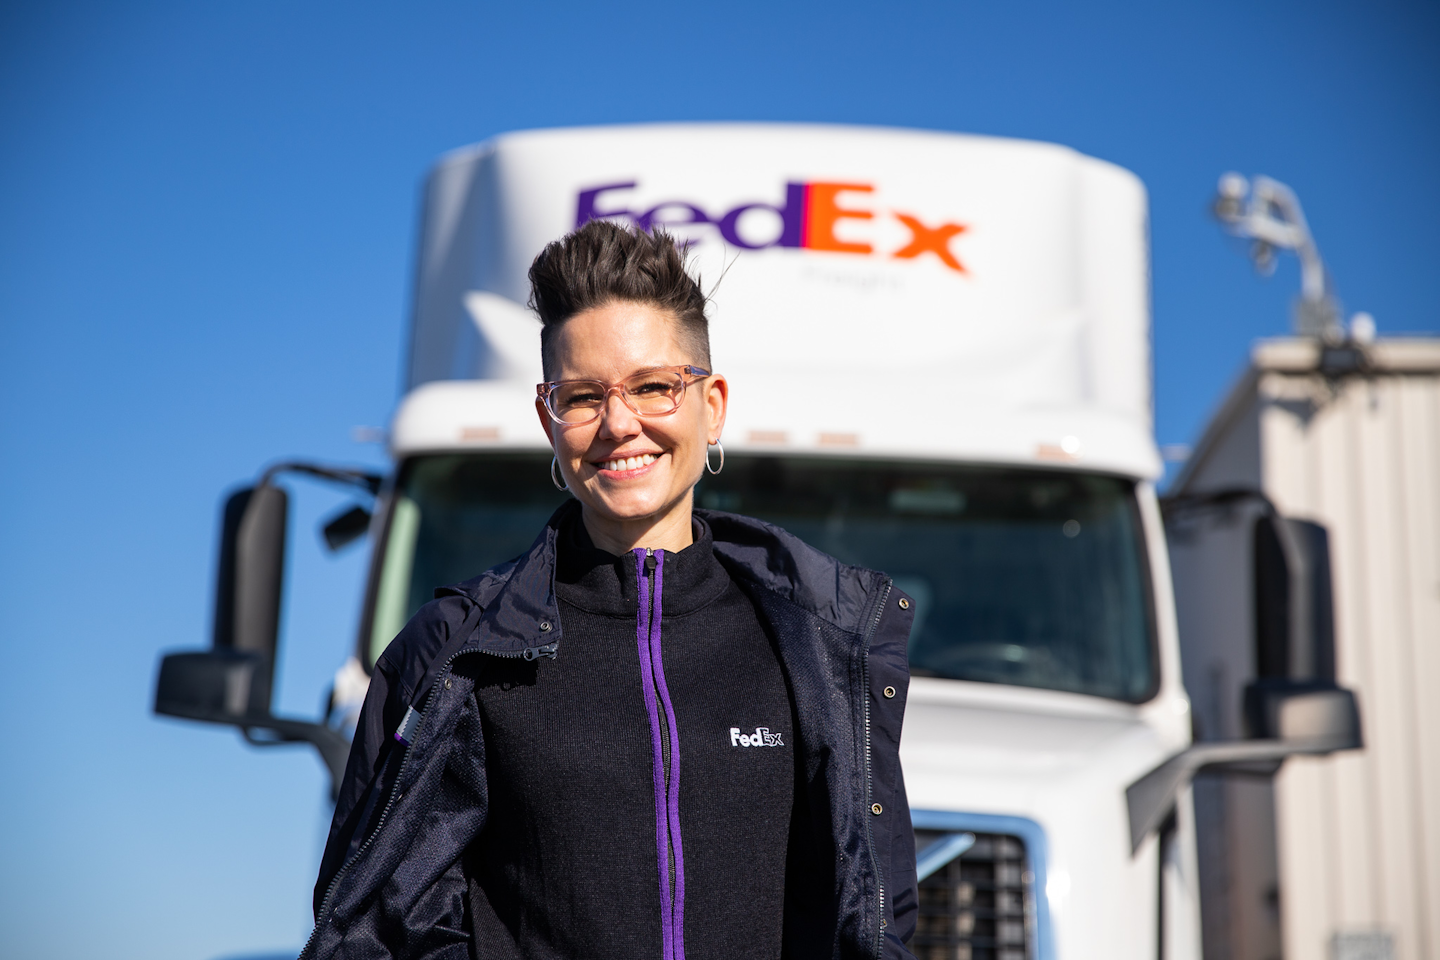 FedEx Freight's Nikki Weaver is the 2021 Women in Trucking Driver of the Year.